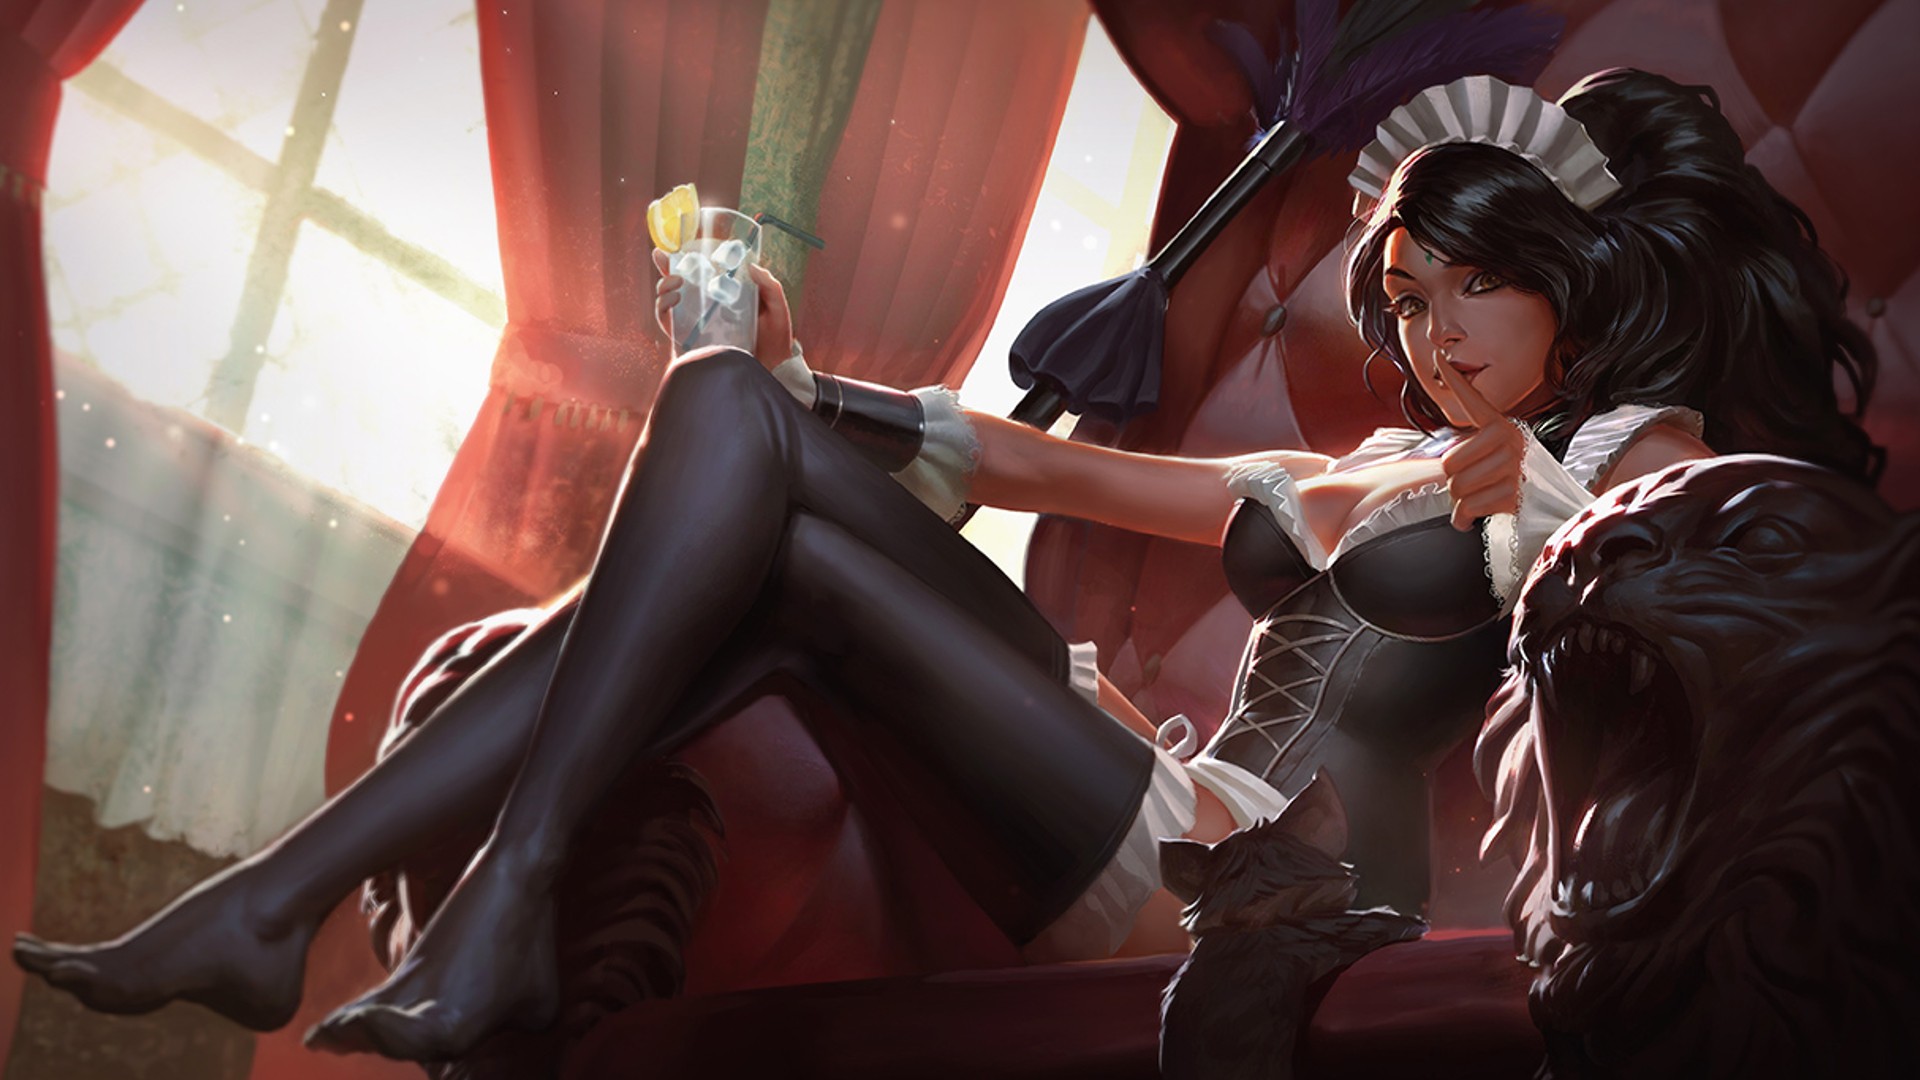 General 1920x1080 League of Legends Nidalee (League of Legends) maid stockings black stockings lingerie black lingerie legs crossed drinking glass PC gaming video game girls video game characters black hair long hair looking at viewer